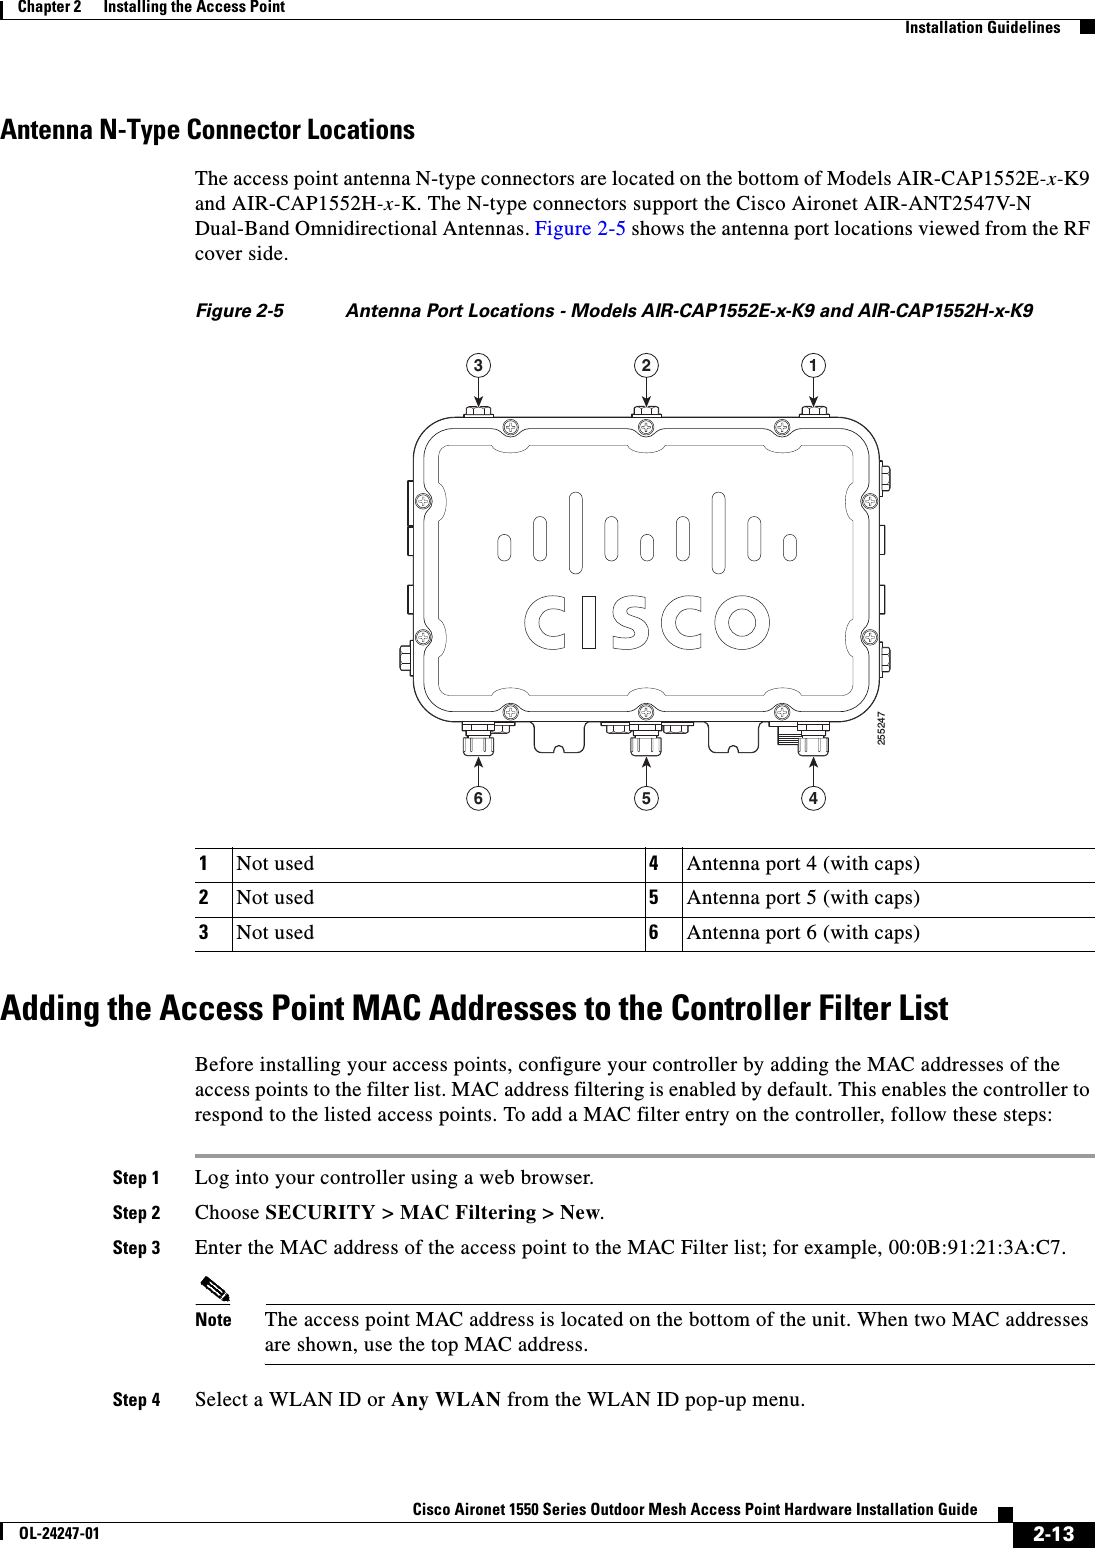  2-13Cisco Aironet 1550 Series Outdoor Mesh Access Point Hardware Installation GuideOL-24247-01Chapter 2      Installing the Access Point  Installation GuidelinesAntenna N-Type Connector LocationsThe access point antenna N-type connectors are located on the bottom of Models AIR-CAP1552E-x-K9 and AIR-CAP1552H-x-K. The N-type connectors support the Cisco Aironet AIR-ANT2547V-N Dual-Band Omnidirectional Antennas. Figure 2-5 shows the antenna port locations viewed from the RF cover side.Figure 2-5 Antenna Port Locations - Models AIR-CAP1552E-x-K9 and AIR-CAP1552H-x-K9Adding the Access Point MAC Addresses to the Controller Filter ListBefore installing your access points, configure your controller by adding the MAC addresses of the access points to the filter list. MAC address filtering is enabled by default. This enables the controller to respond to the listed access points. To add a MAC filter entry on the controller, follow these steps:Step 1 Log into your controller using a web browser.Step 2 Choose SECURITY &gt; MAC Filtering &gt; New.Step 3 Enter the MAC address of the access point to the MAC Filter list; for example, 00:0B:91:21:3A:C7.Note The access point MAC address is located on the bottom of the unit. When two MAC addresses are shown, use the top MAC address.Step 4 Select a WLAN ID or Any WLAN from the WLAN ID pop-up menu. 1Not used 4Antenna port 4 (with caps)2Not used 5Antenna port 5 (with caps)3Not used 6Antenna port 6 (with caps)255247123456